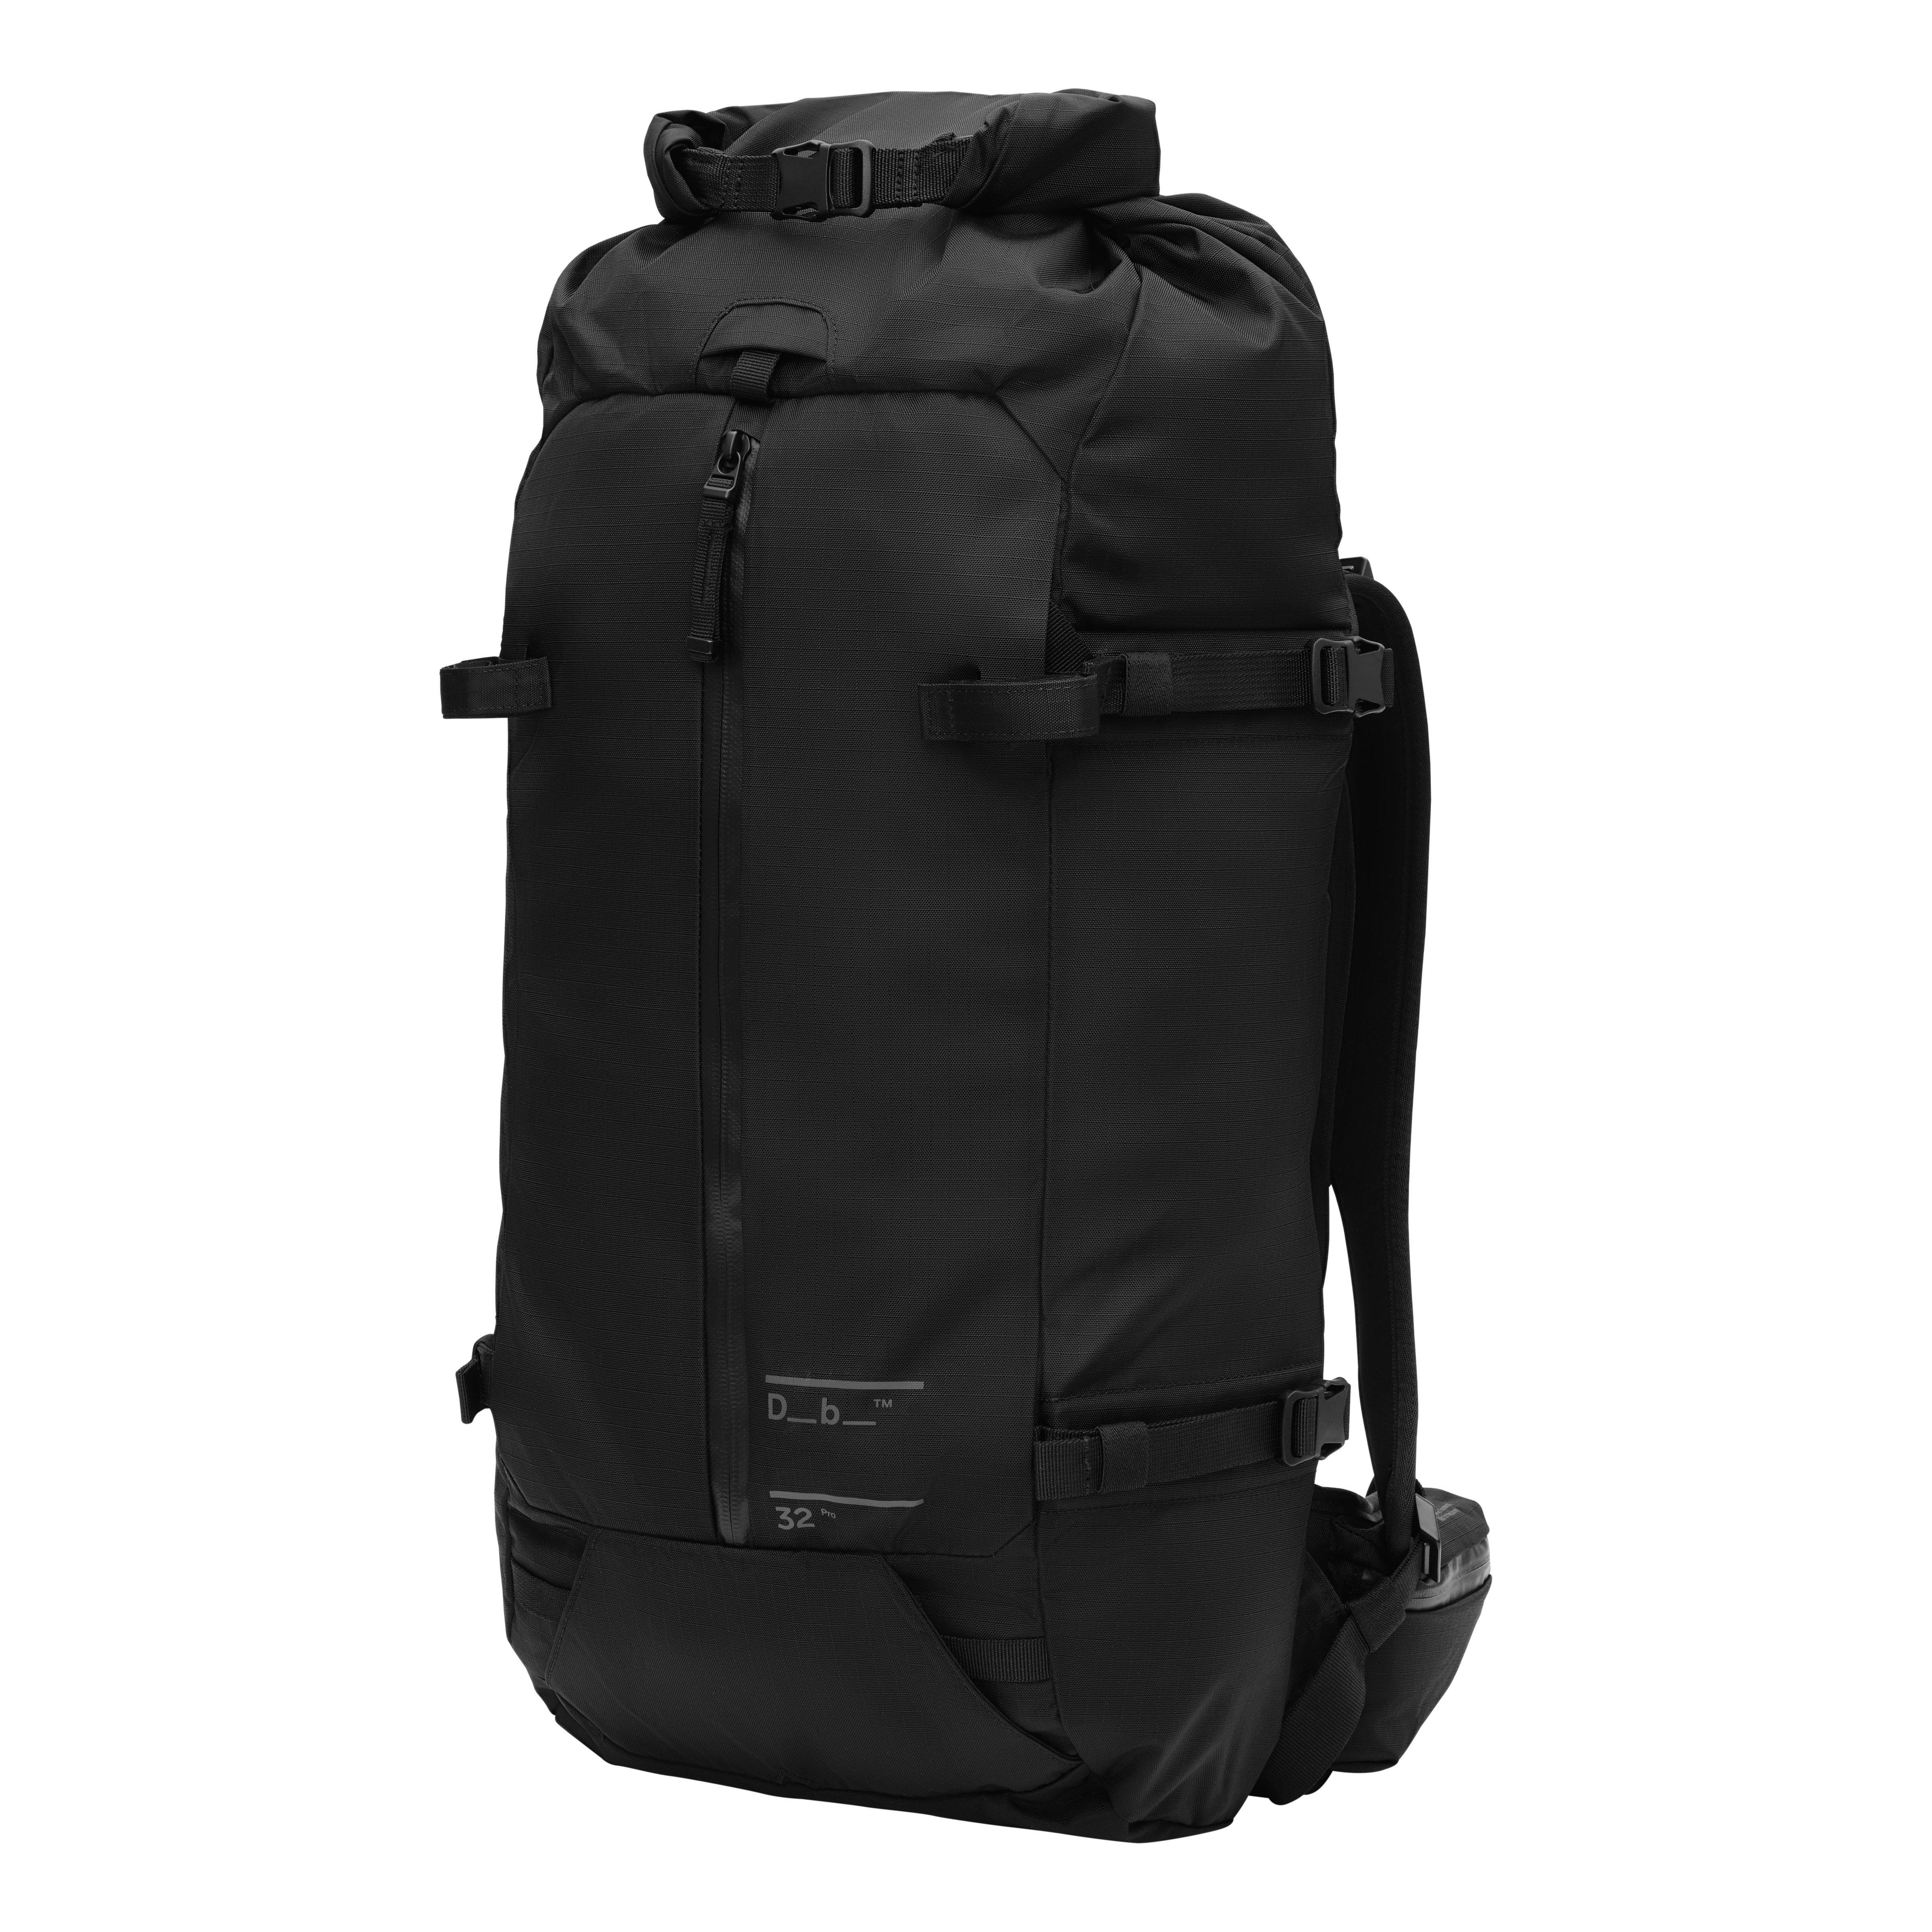 Snow Pro Backpack - 32L